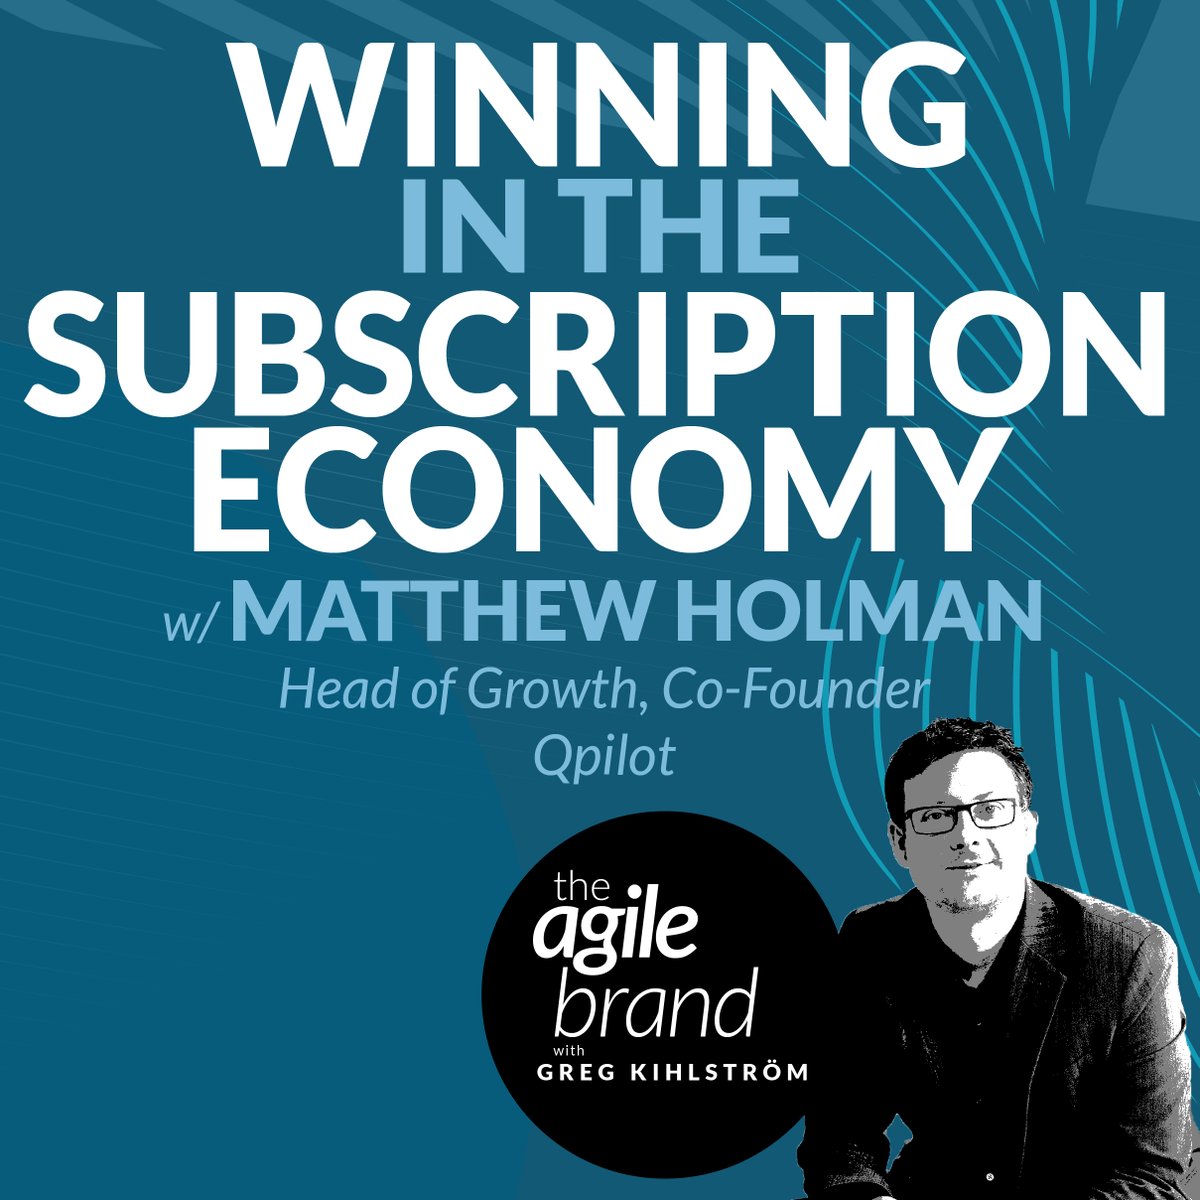 ☑️  NEW EPISODE: buff.ly/3Ze4KUt  With the #subscriptioneconomy expected to be over $1.5T by 2025, there is a movement well underway. Matthew Holman of buff.ly/3Zk067a  joins the #podcast to talk about launching, scalling and innovating #subscription programs.